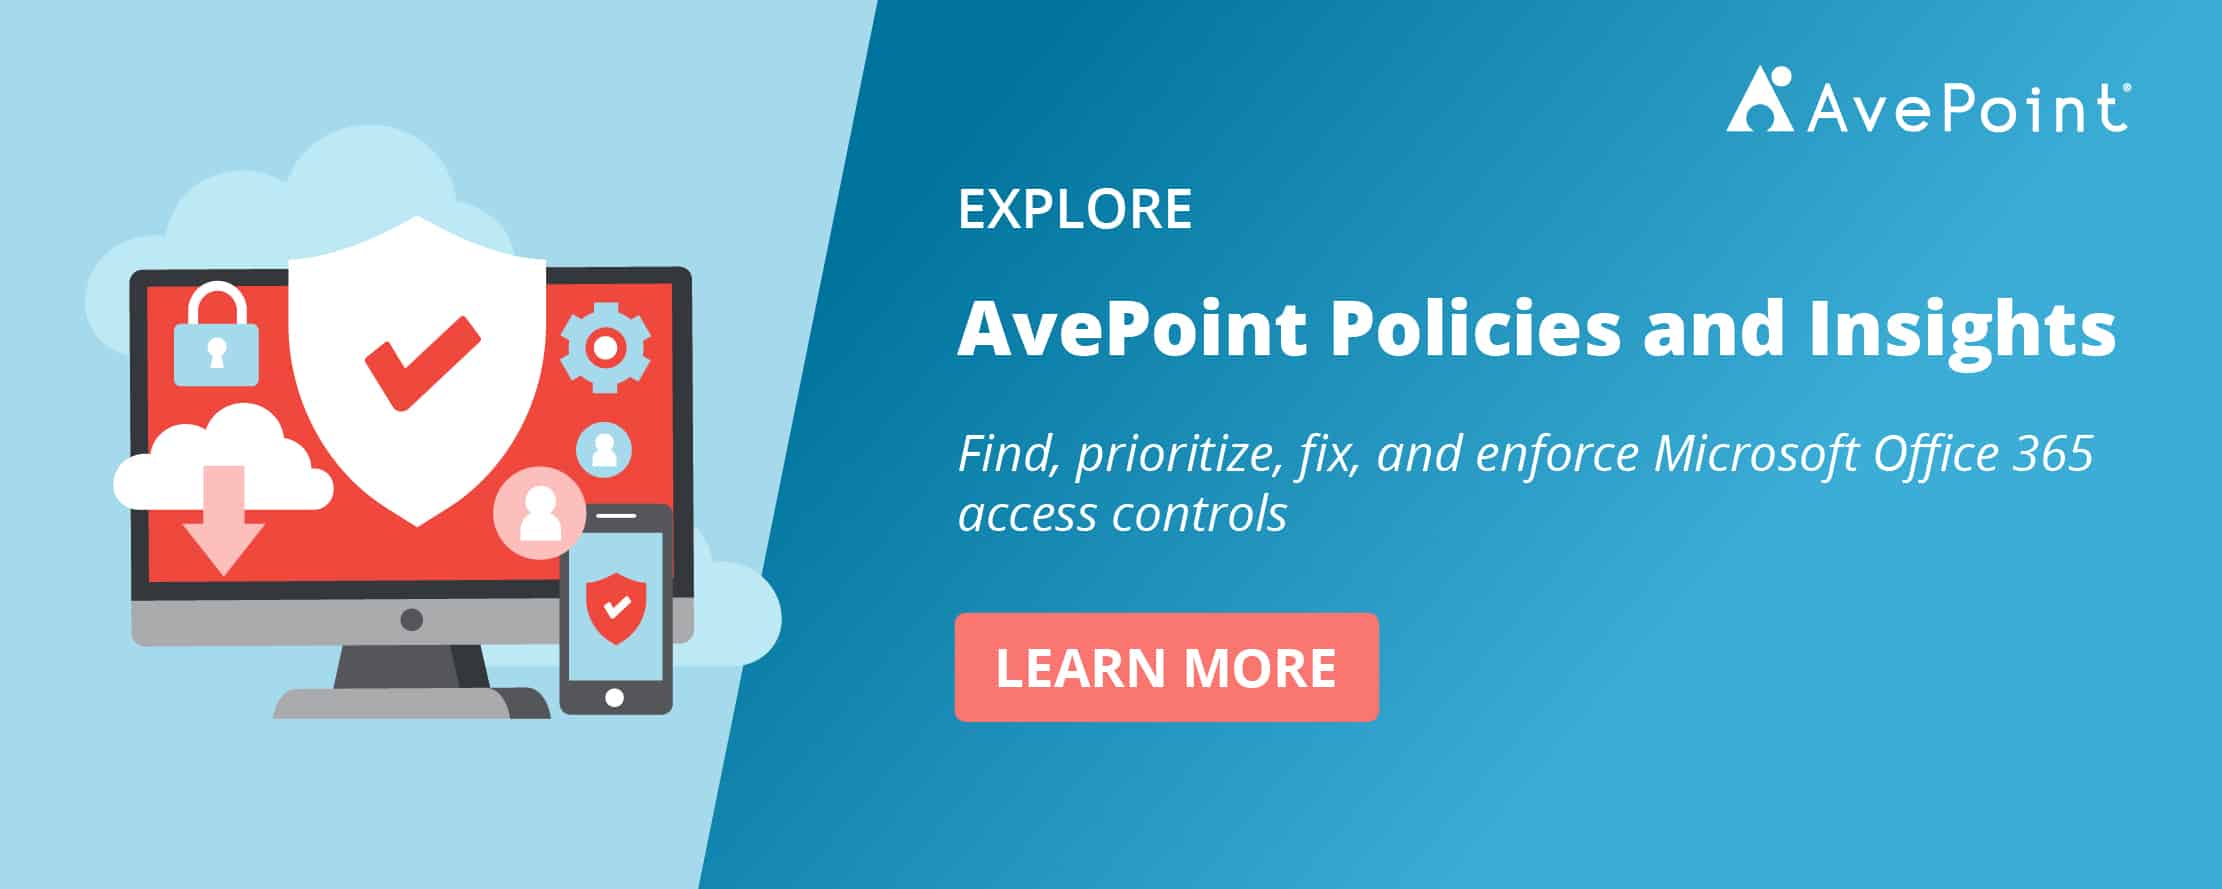 avepoint-policies-and-insights